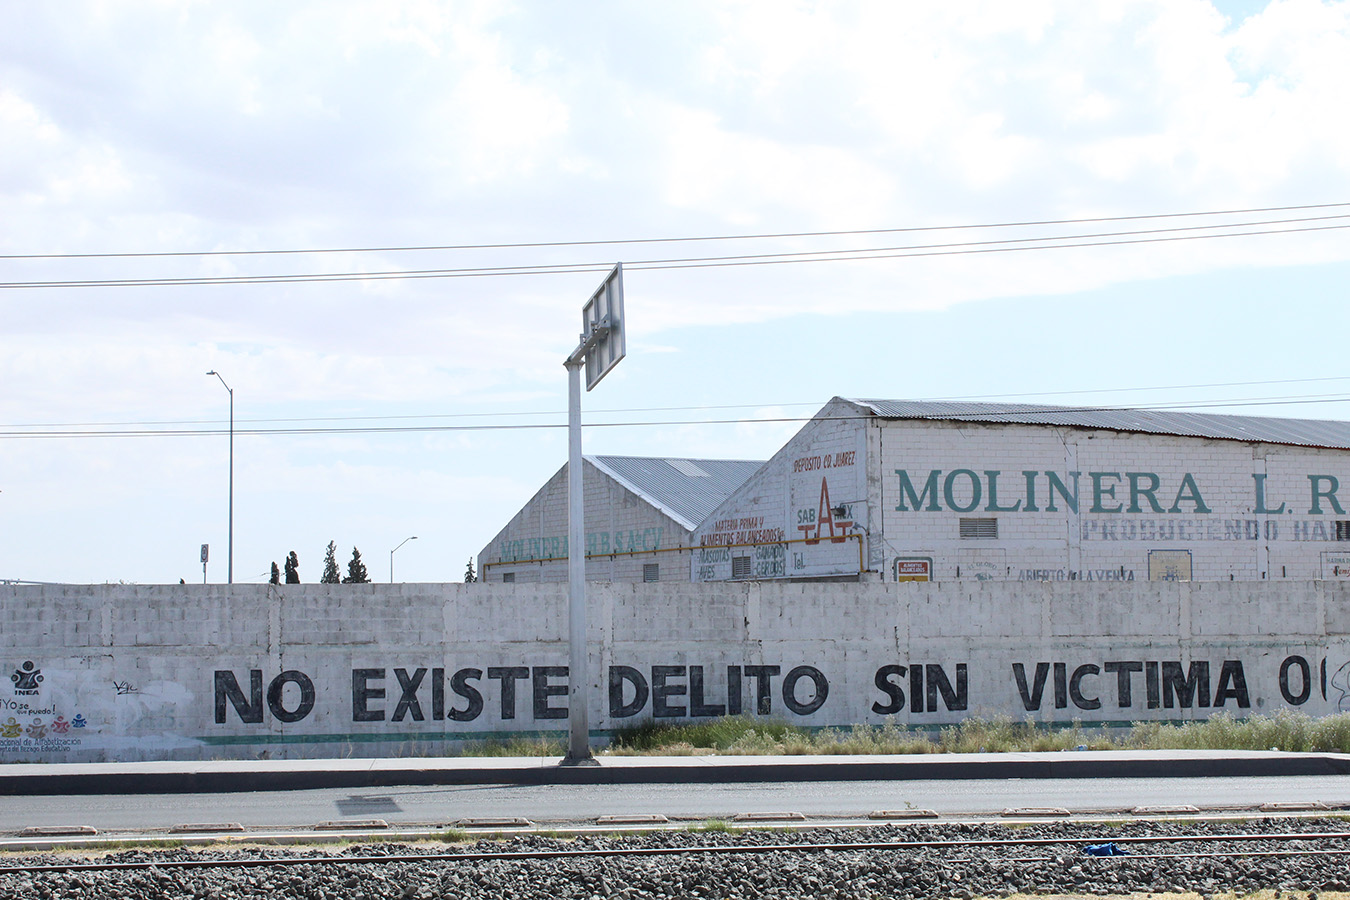 Around the corner from Eco-Canis: “There is no crime without a victim.” Photo by Iván Sandoval-Cervantes.